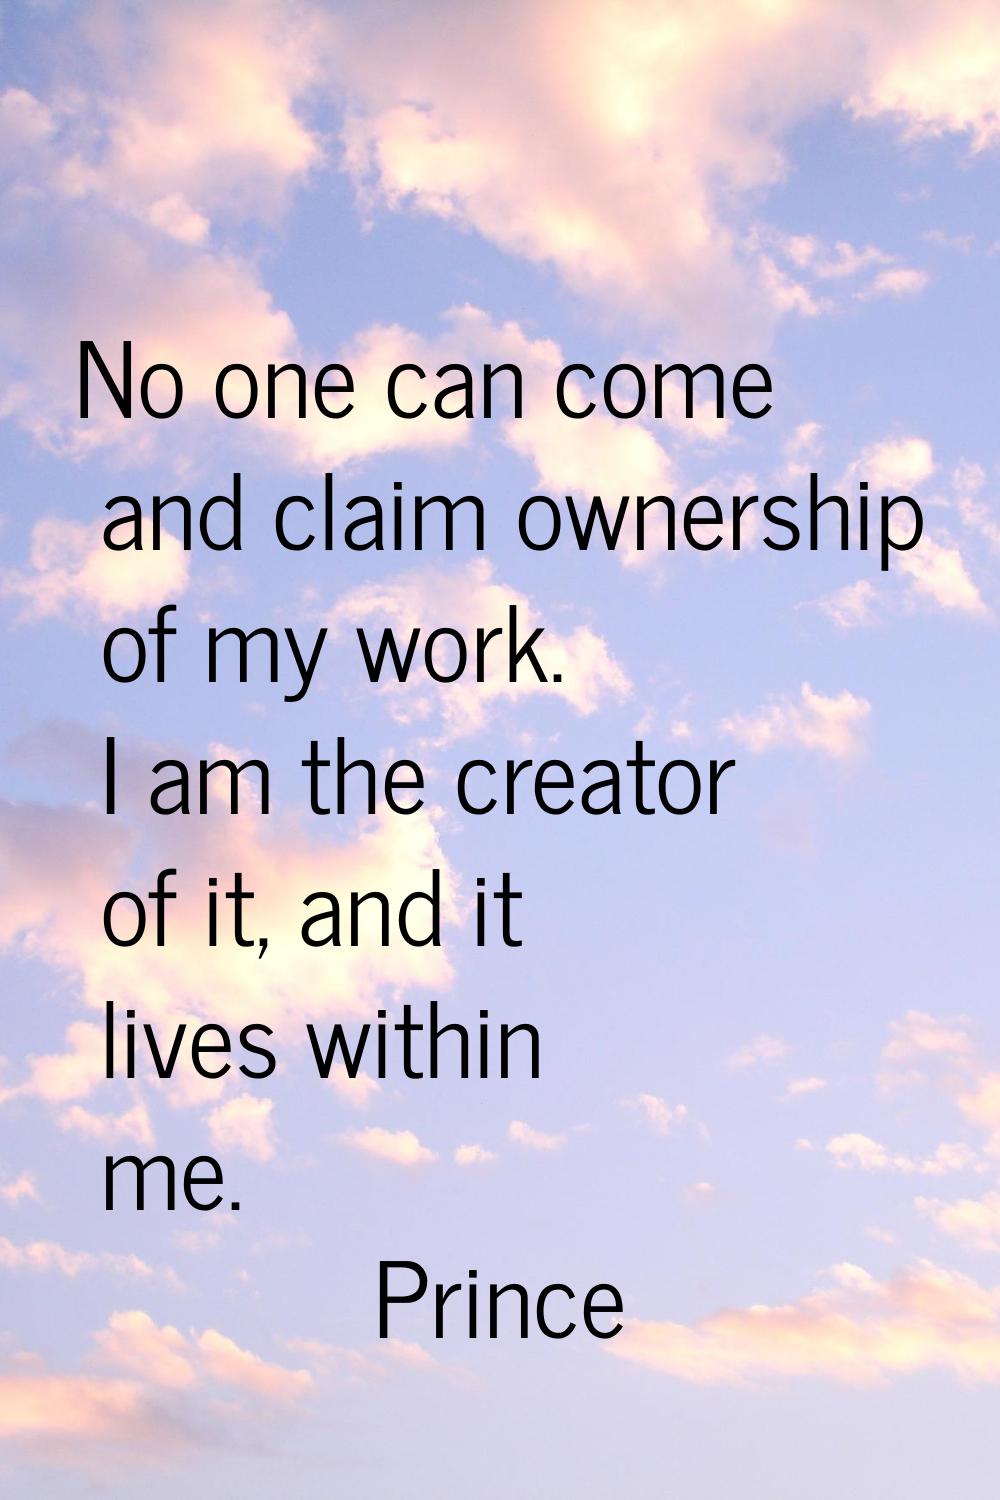 No one can come and claim ownership of my work. I am the creator of it, and it lives within me.